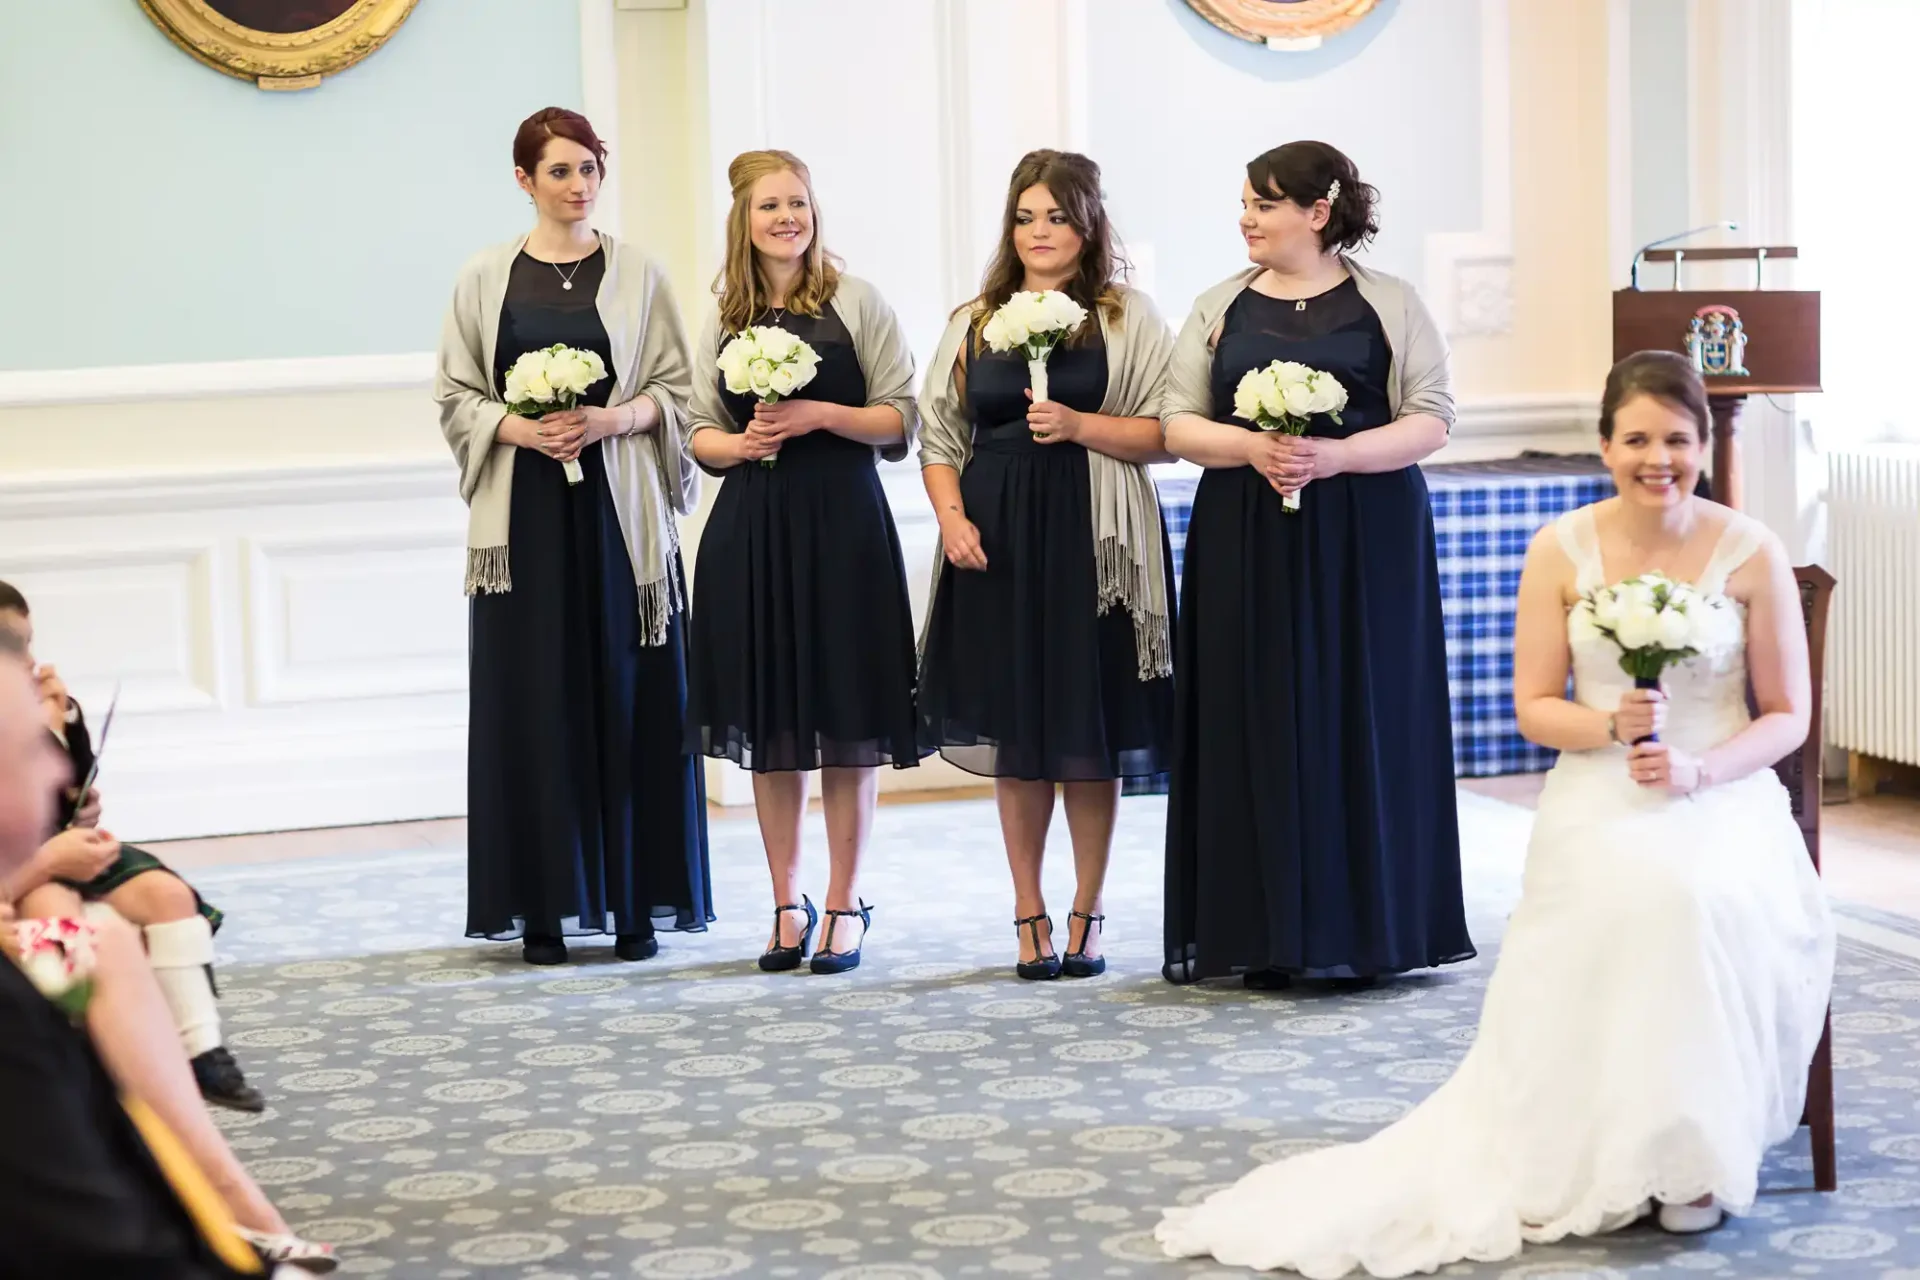 Four bridesmaids in navy dresses and a bride in white at a wedding ceremony, all holding bouquets, smiling as they watch something off-camera.